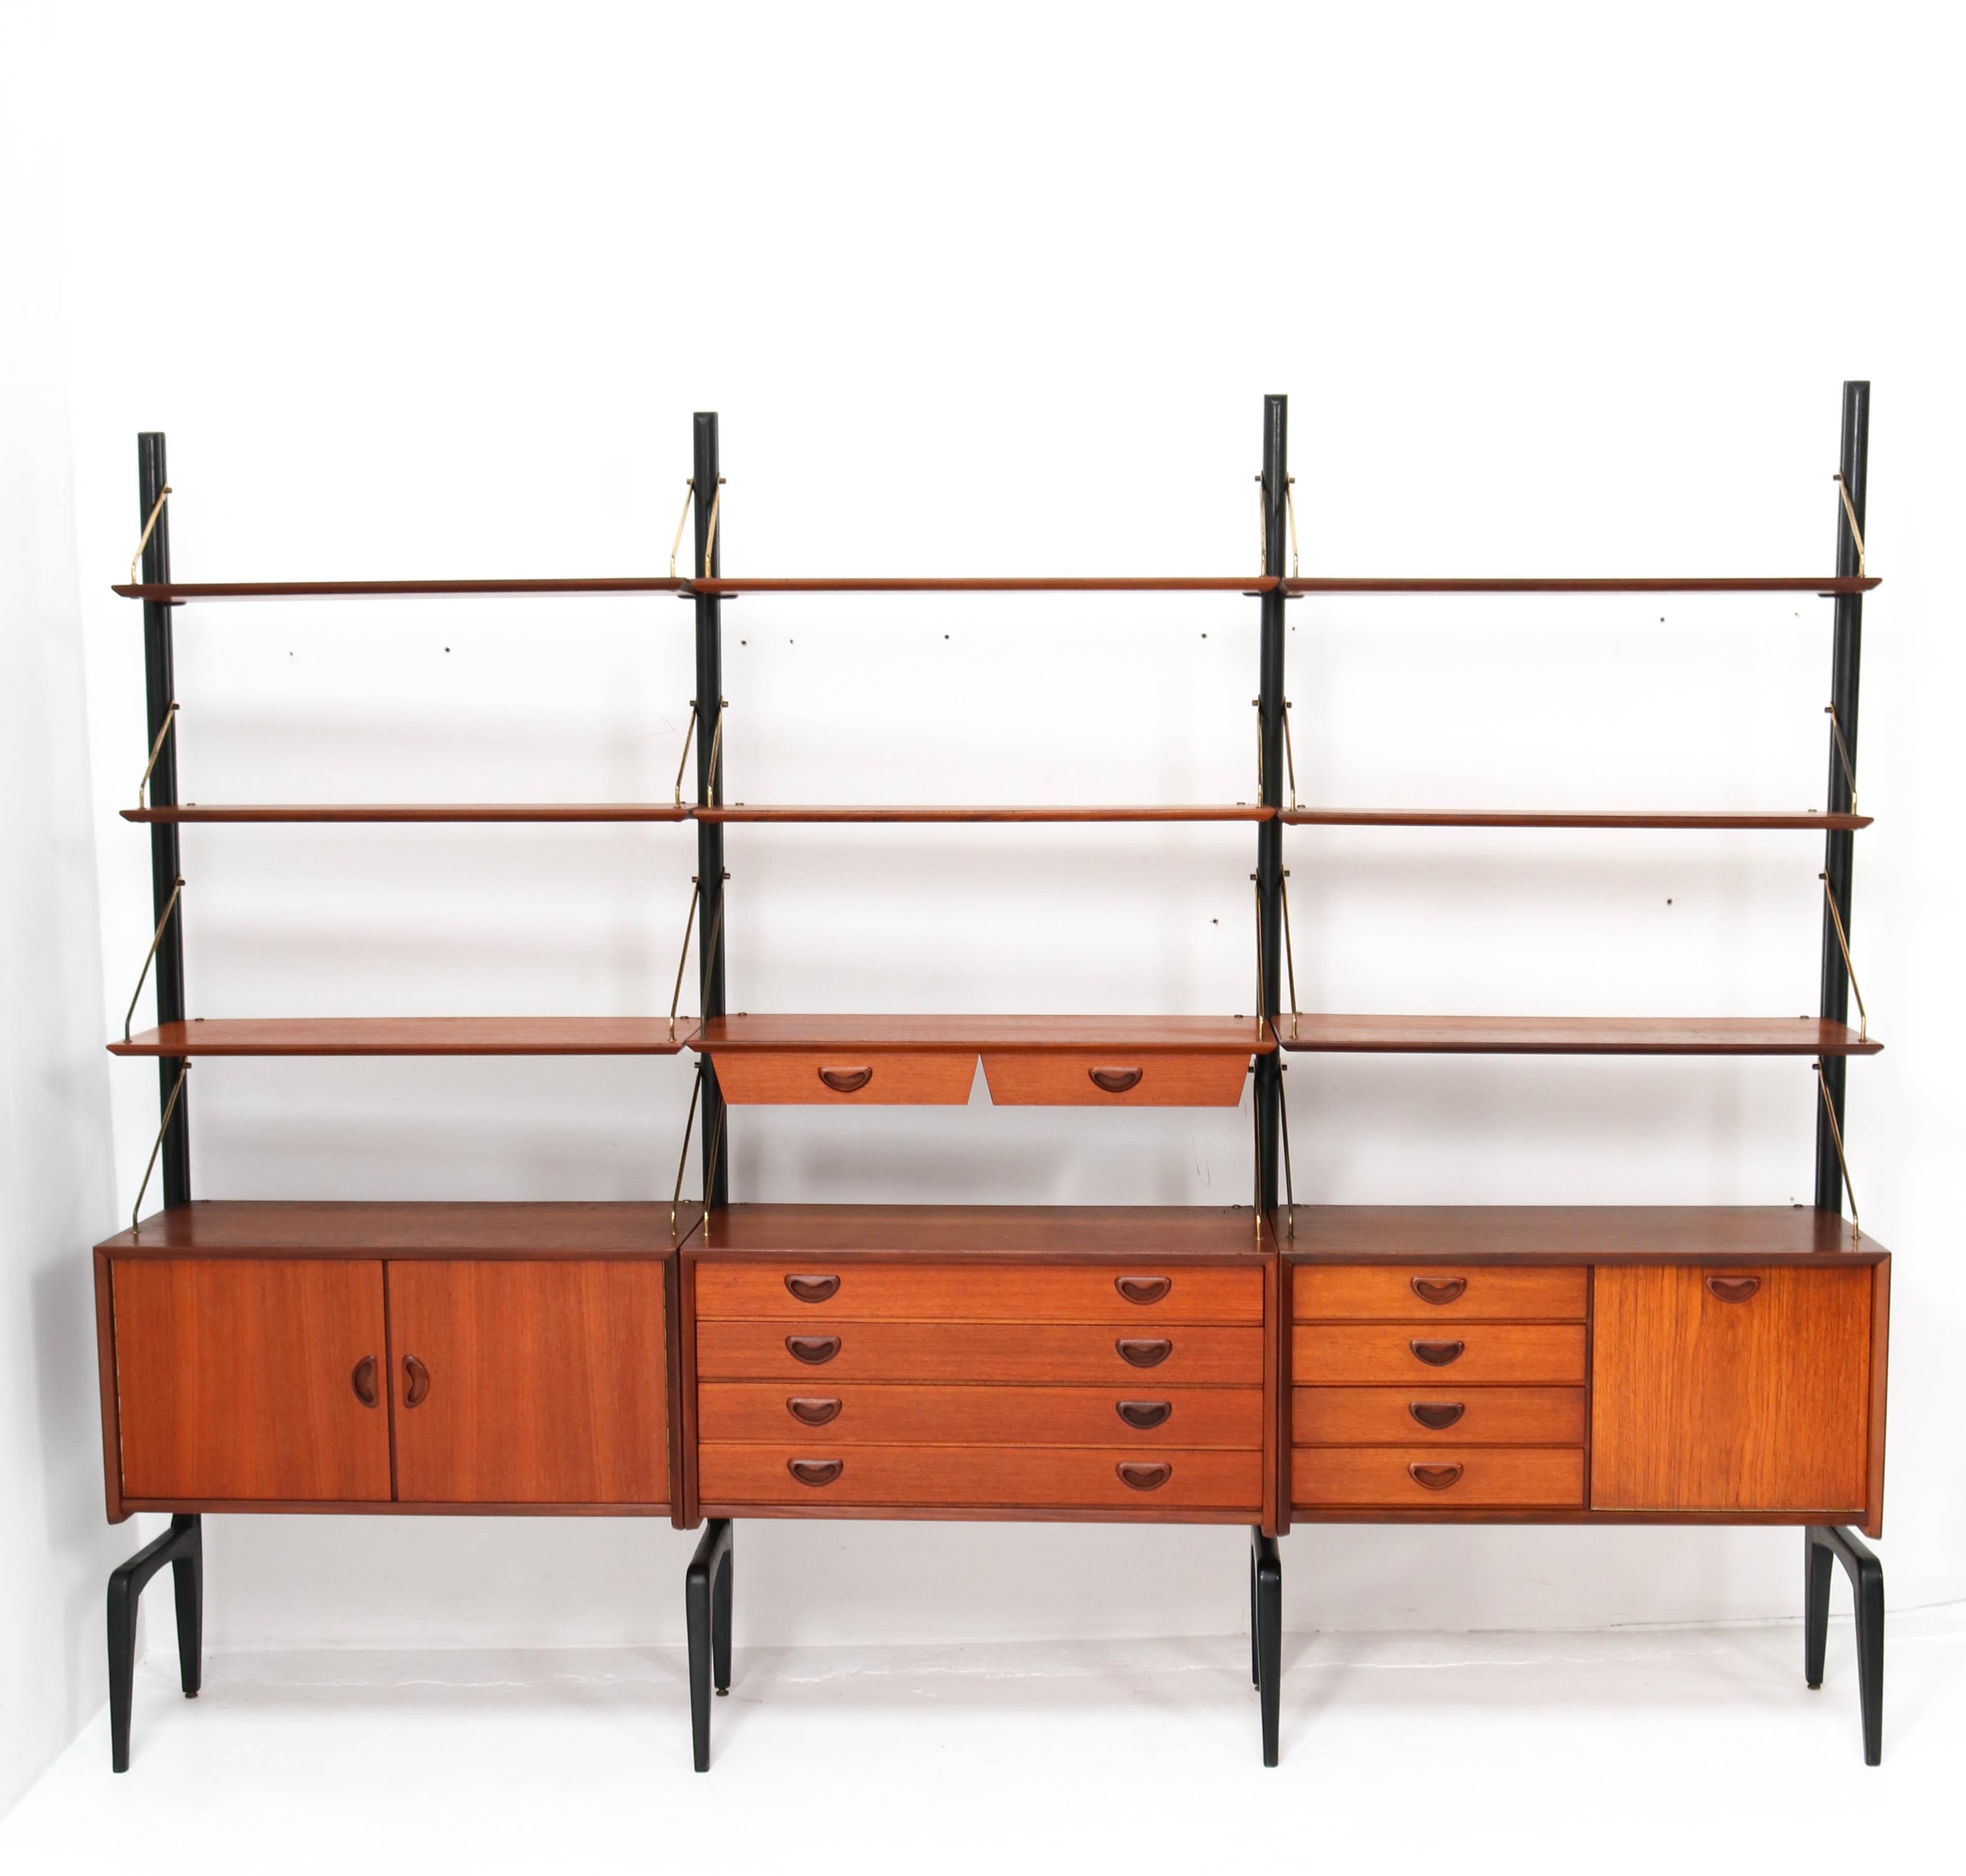 Magnificent Mid-Century Modern free standing modular wall unit.
Design by Louis van Teeffelen for Webe.
Striking Dutch design from the 1950s.
This wall unit consists of:
4 original black lacquered wooden uprights H: 200 cm or 78.74 in.W: 4 cm or